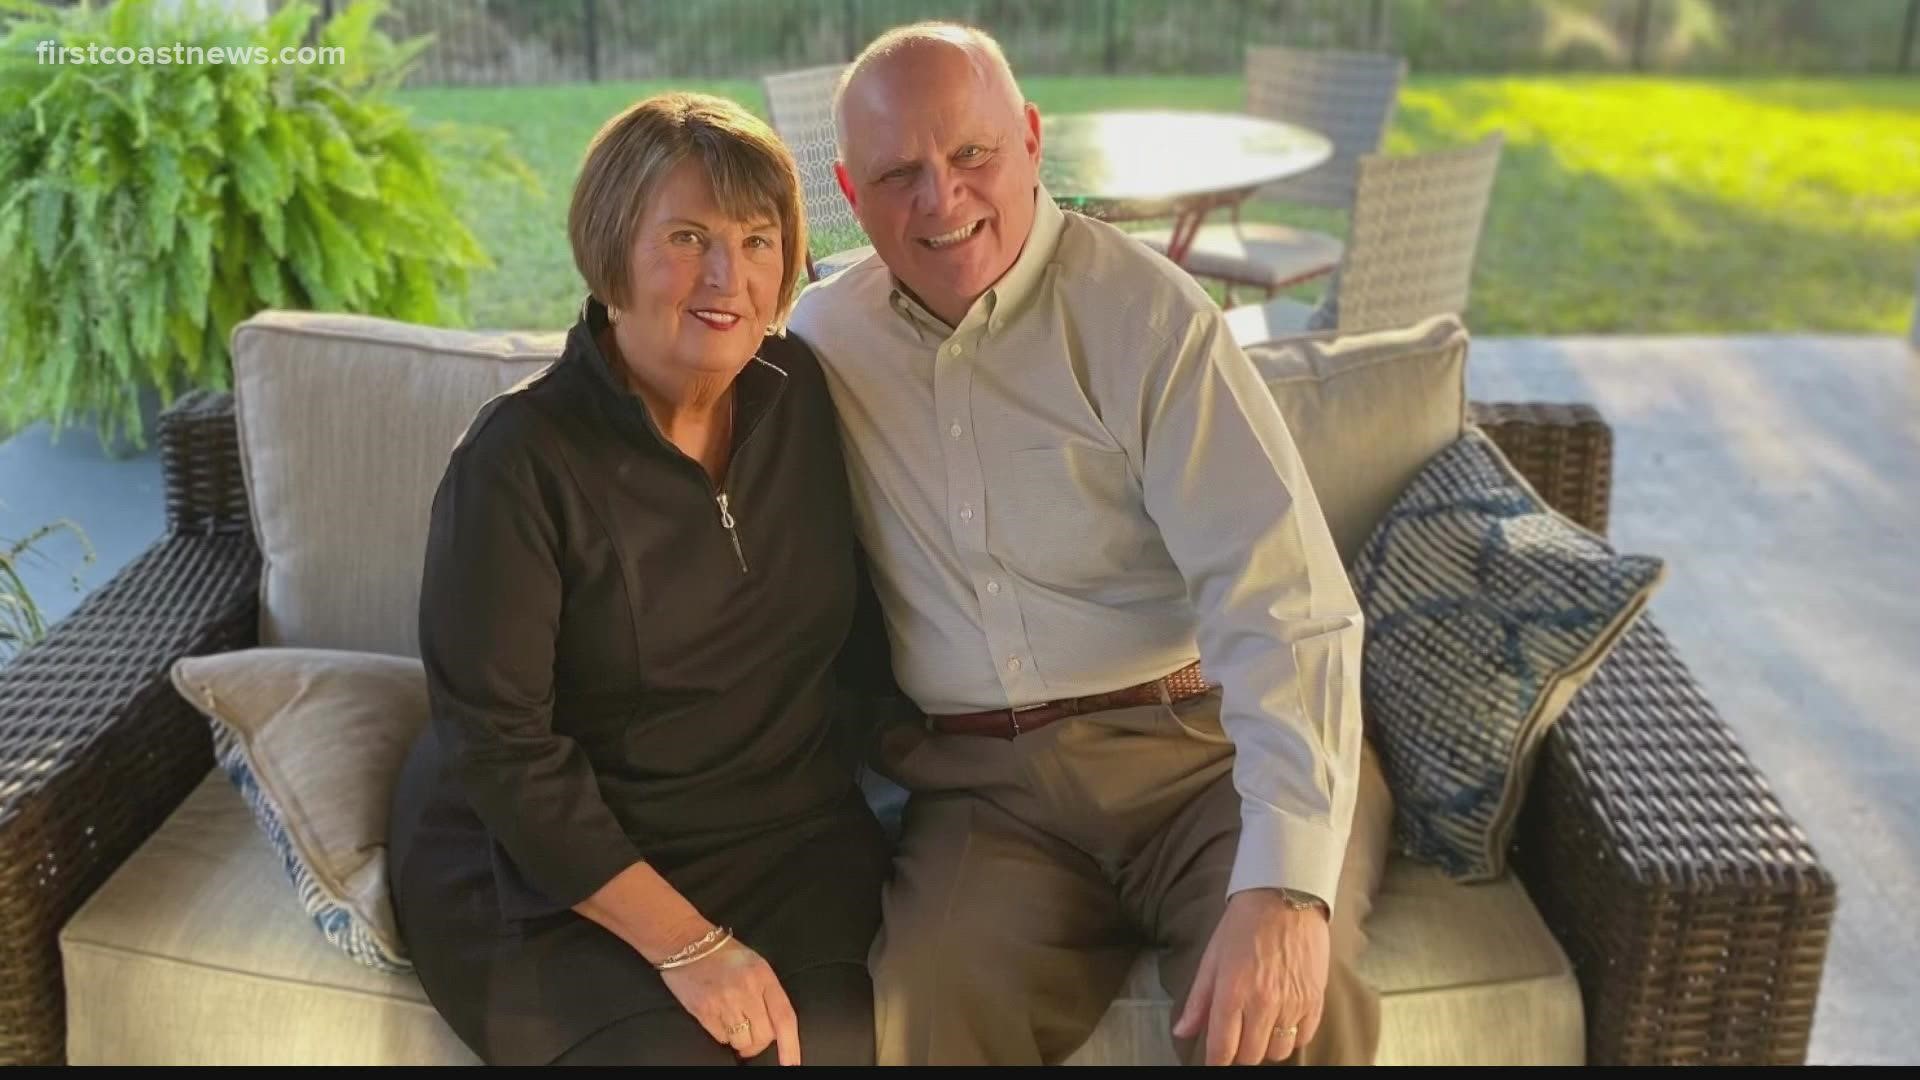 Daniel Pisano, 71, died at Mayo Clinic last week. His family unsuccessfully sued to force the hospital to allow him to receive ivermectin treatments.